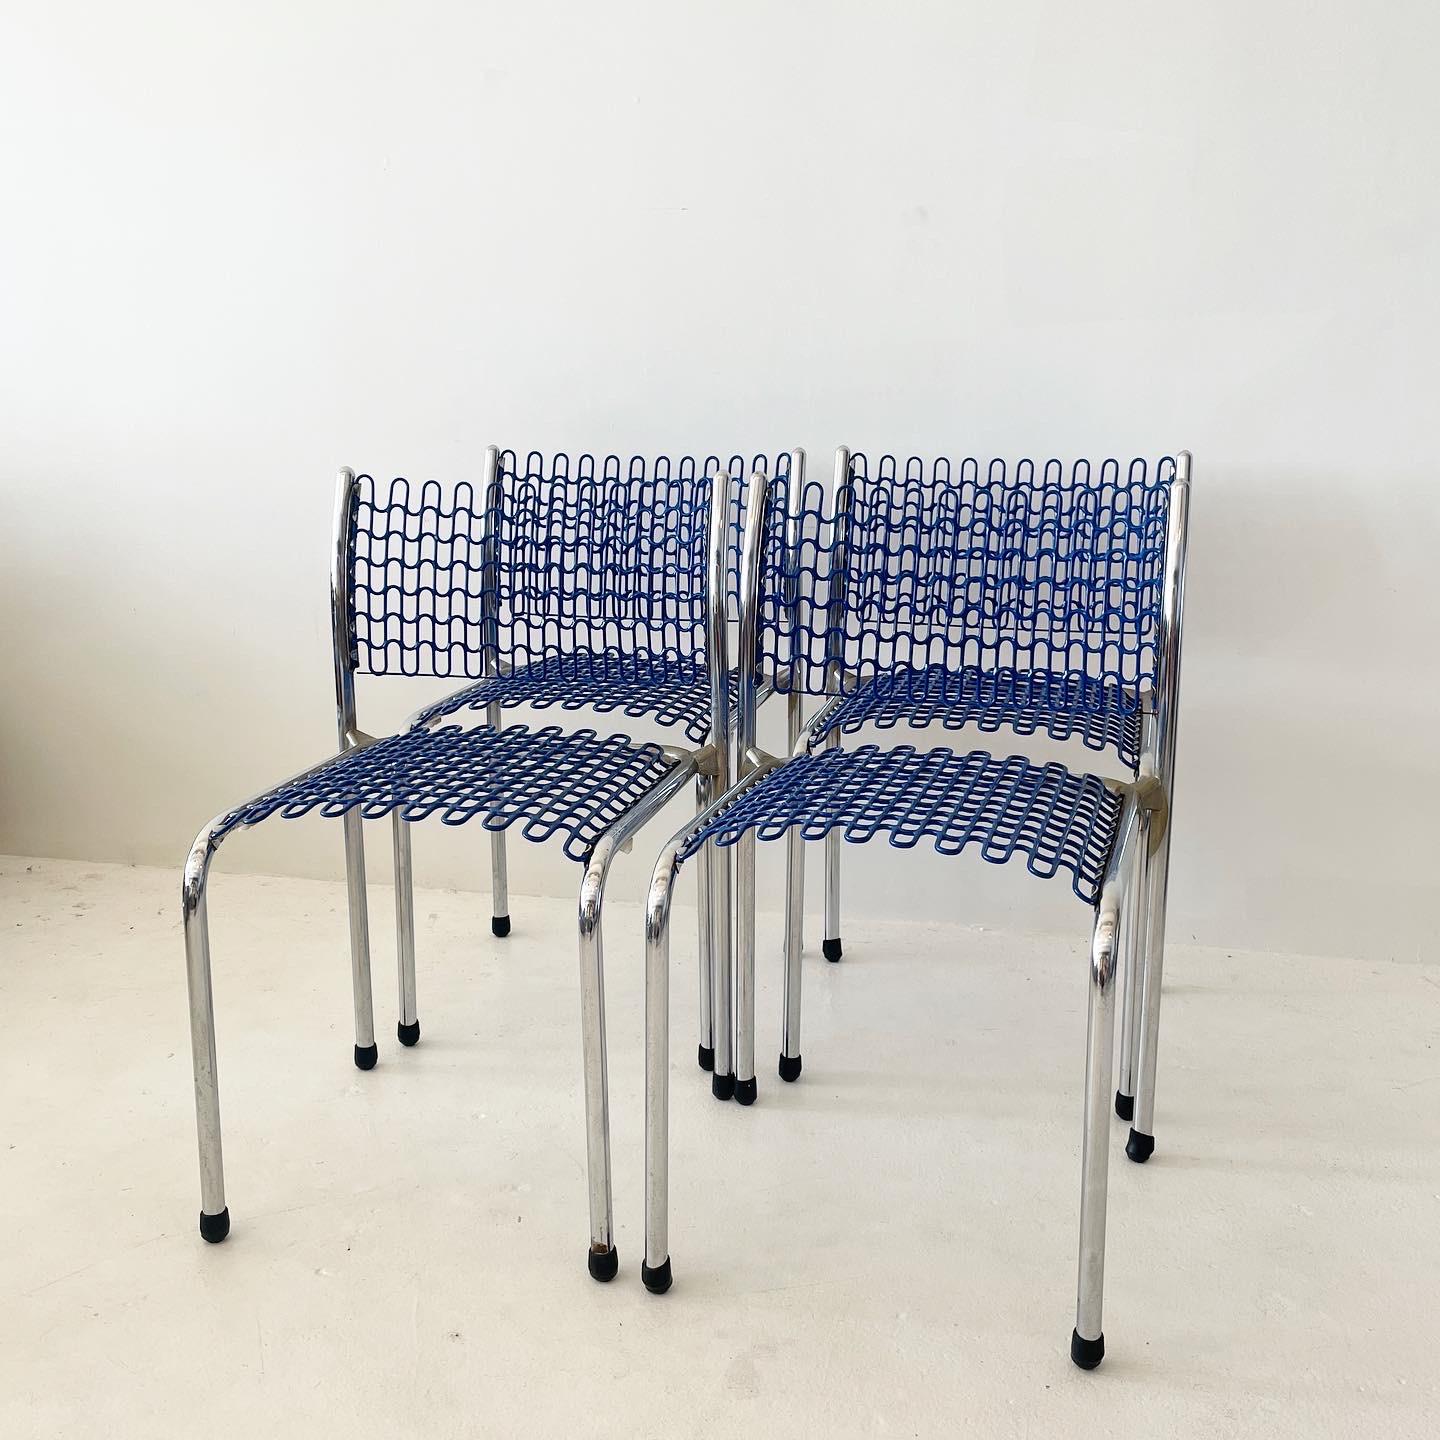 Post-Modern Blue Sof Tech Chairs by David Rowland for Thonet (set of 4) For Sale